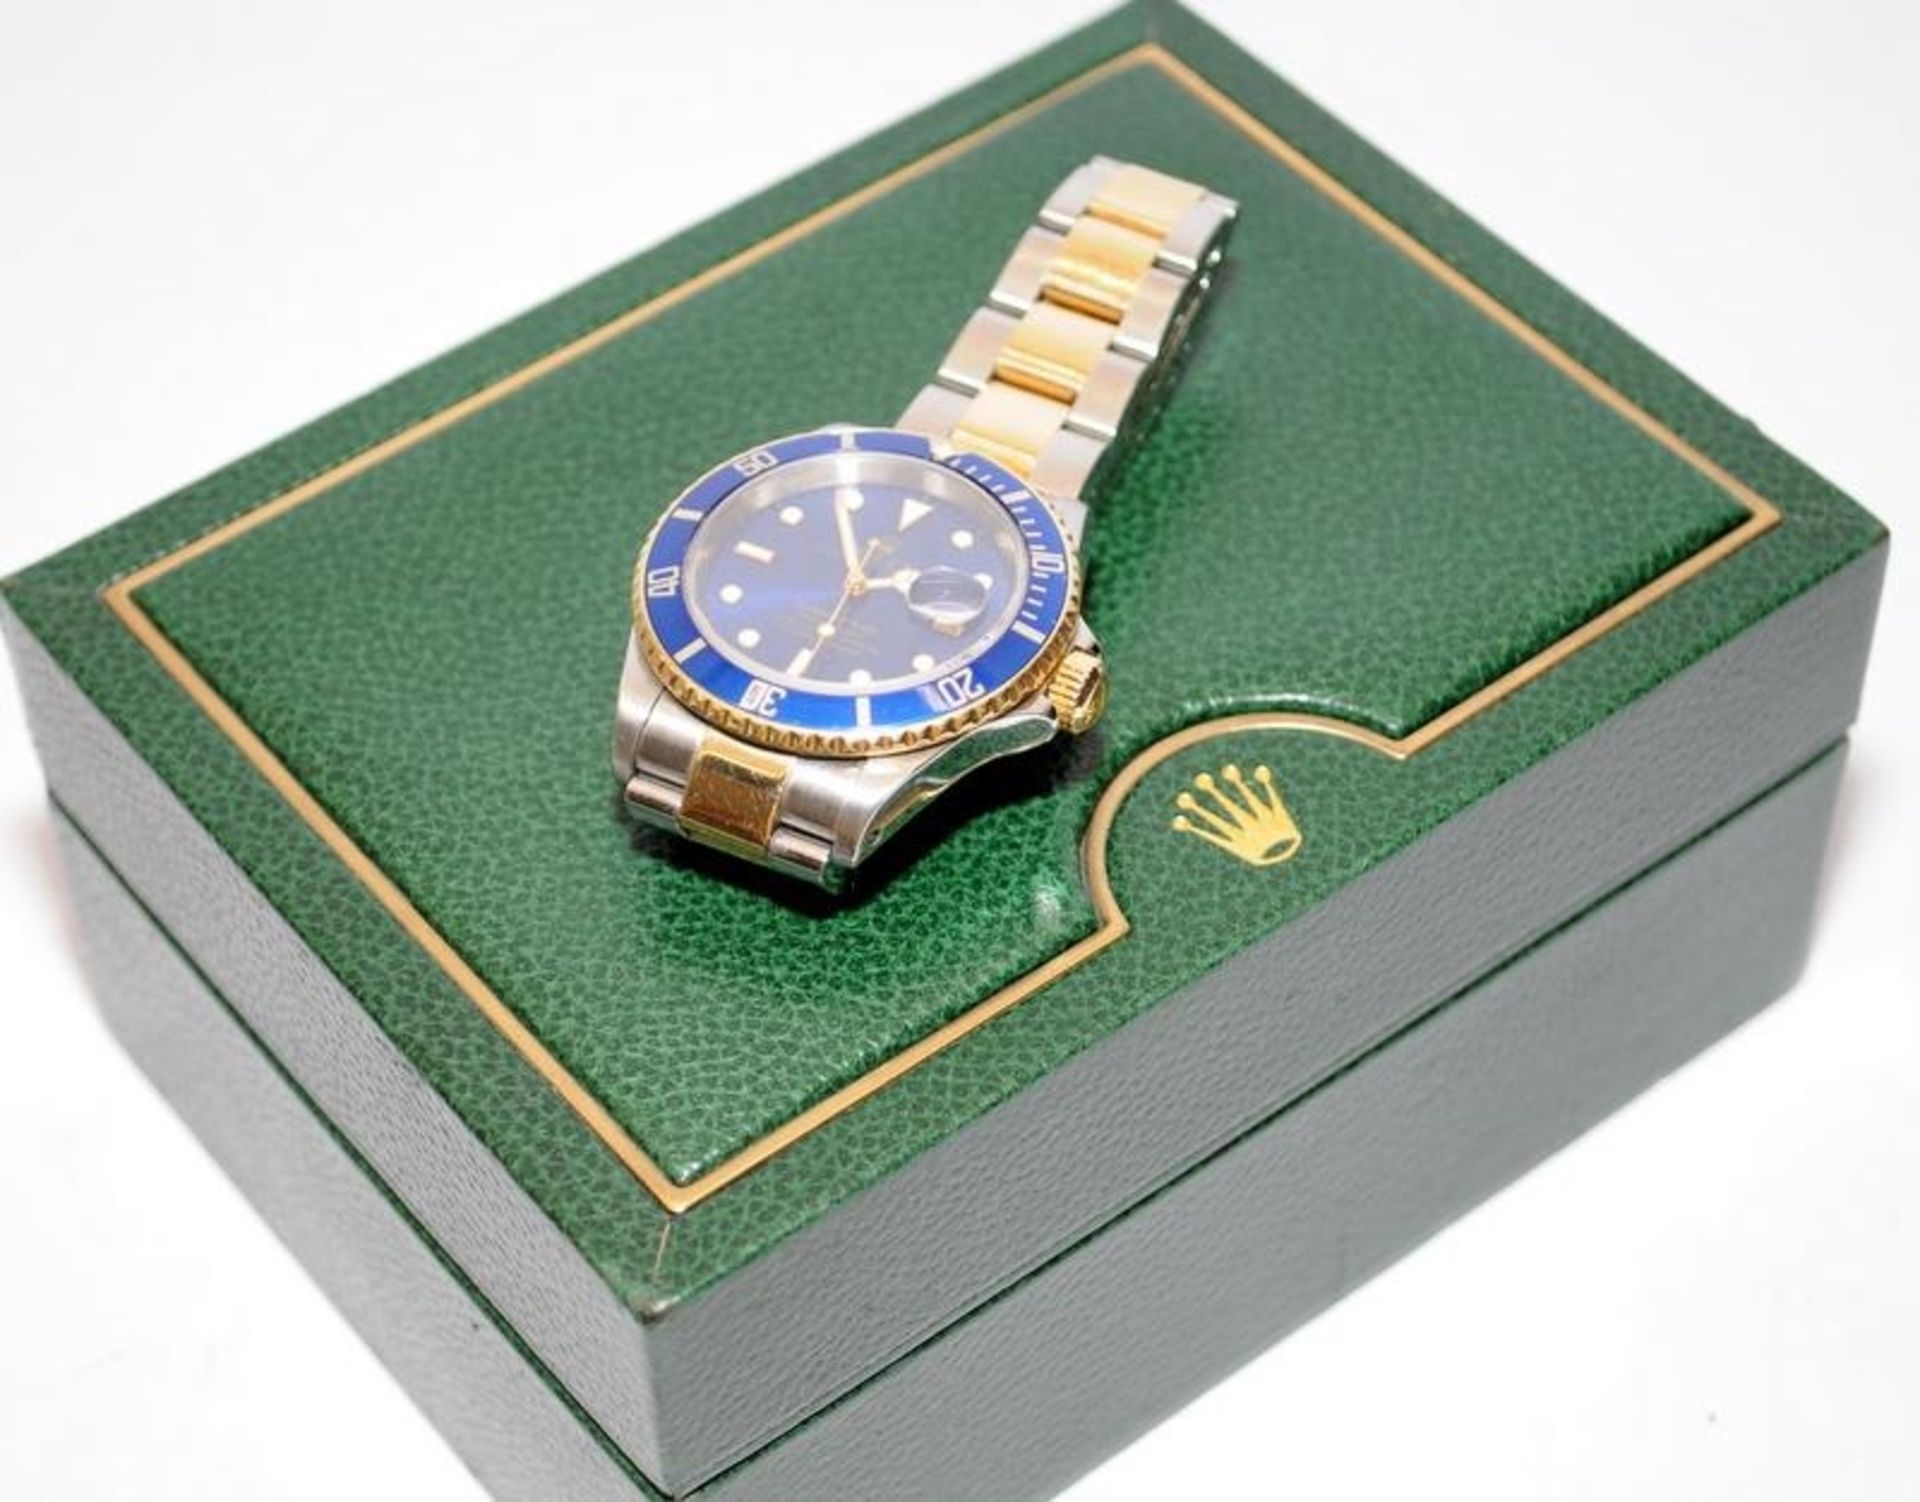 Gents Rolex Oyster Perpetual Date Submariner automatic chronometer, model number 16613. Blue dial - Image 7 of 7